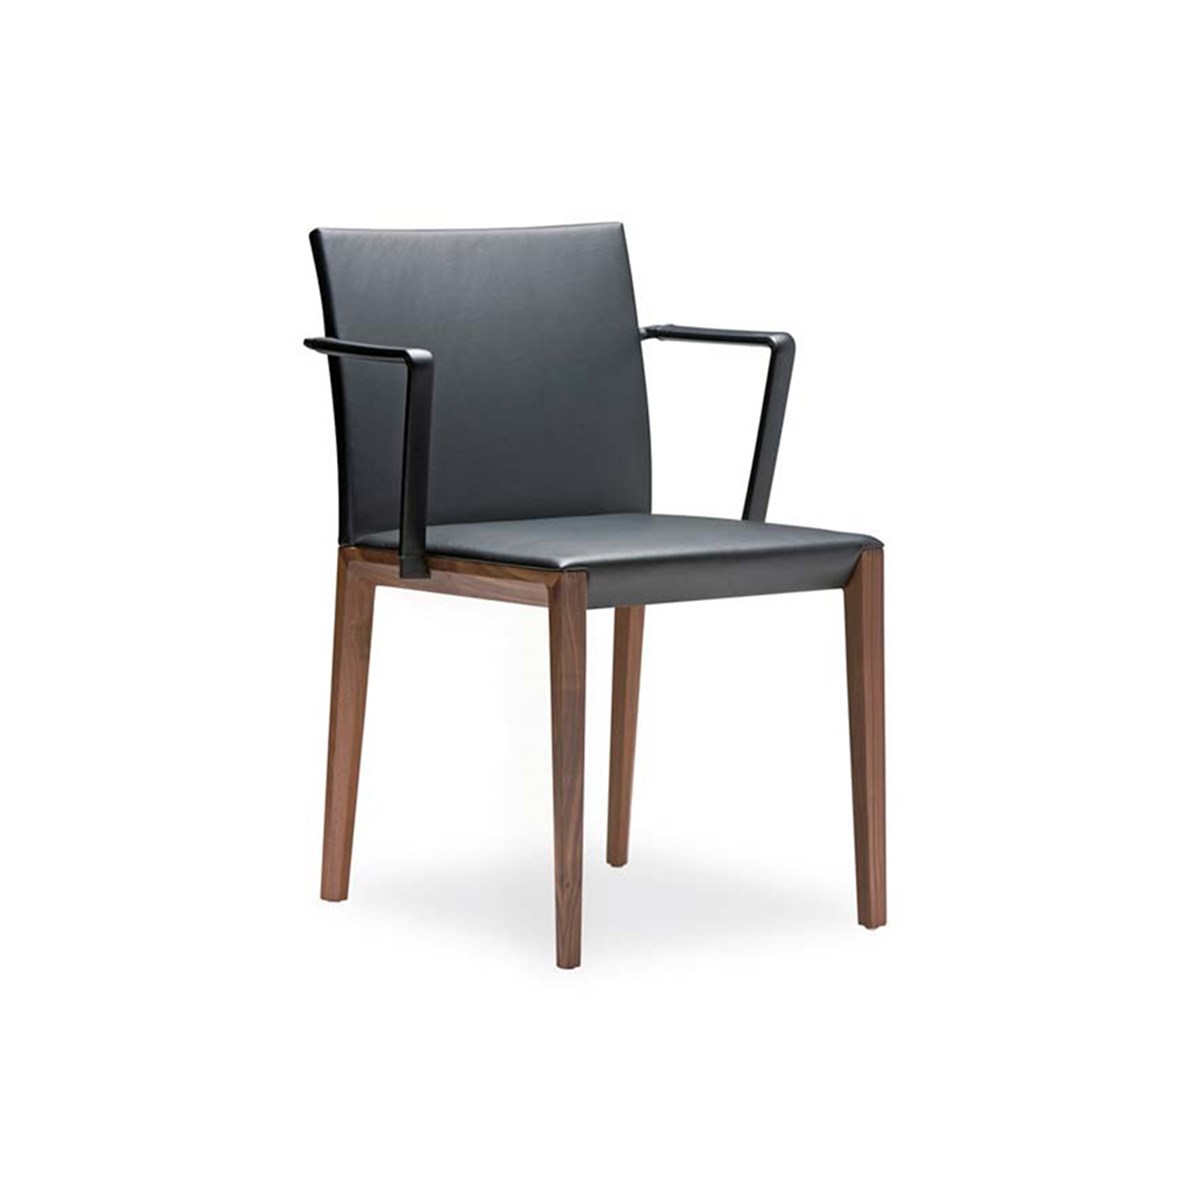 Walter-Knoll-EOOS-Andoo-Dining-Chair-Matisse-1